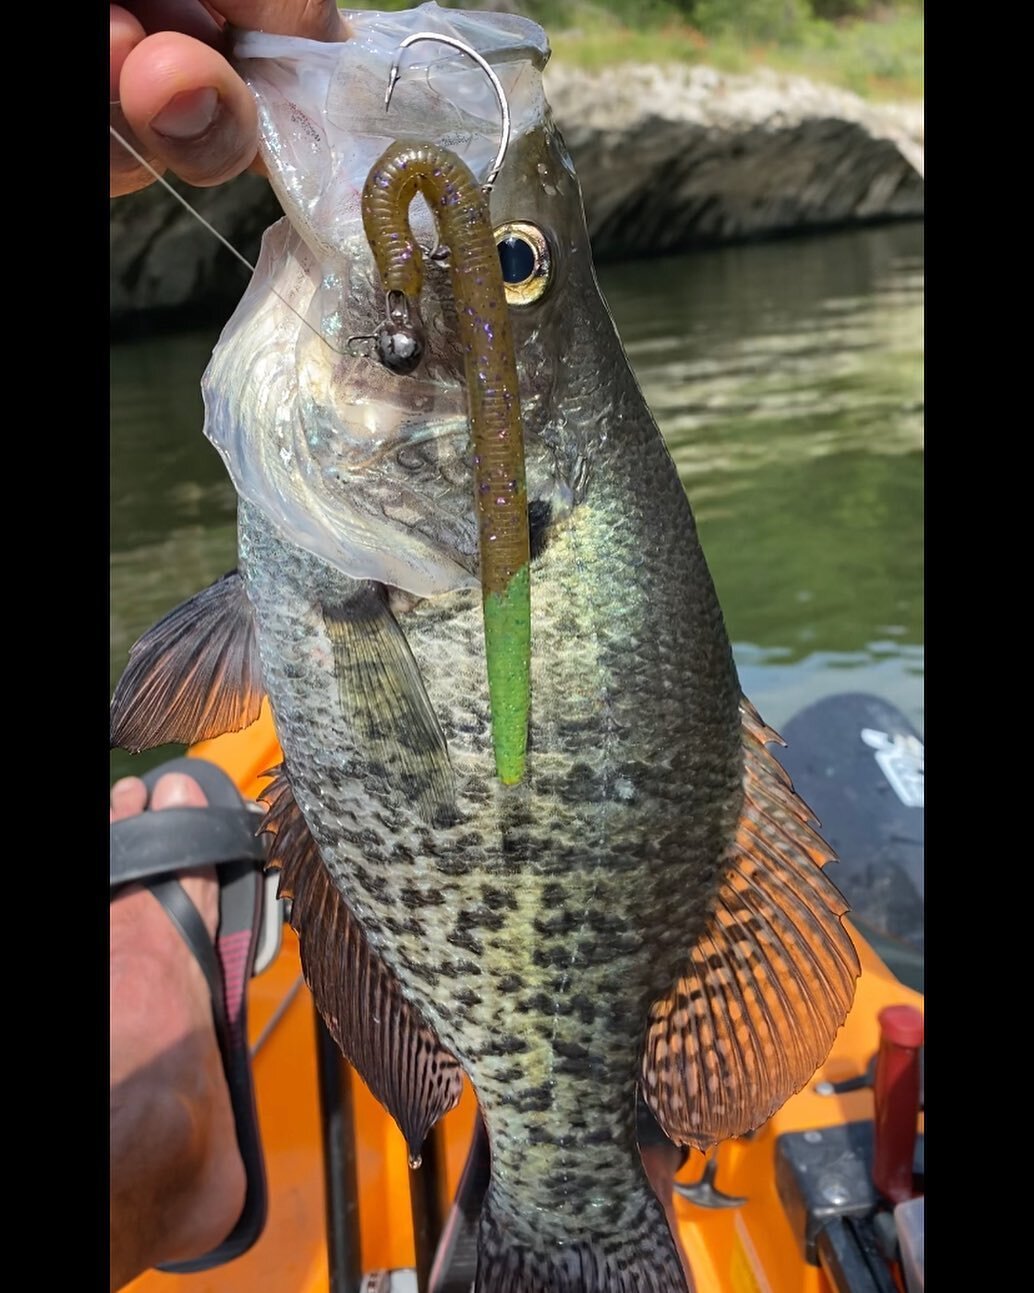 Anyone else caught a #crappie on a 6&rdquo; #senko on swivel head. Thought I had decent #bass when this guy tugged my line.
.
.
#bassfishing #crappiefishing #bass #largemouthbass #smallmouthnation #kayakbassfishing #kayaking #kayak #kayakingadventure